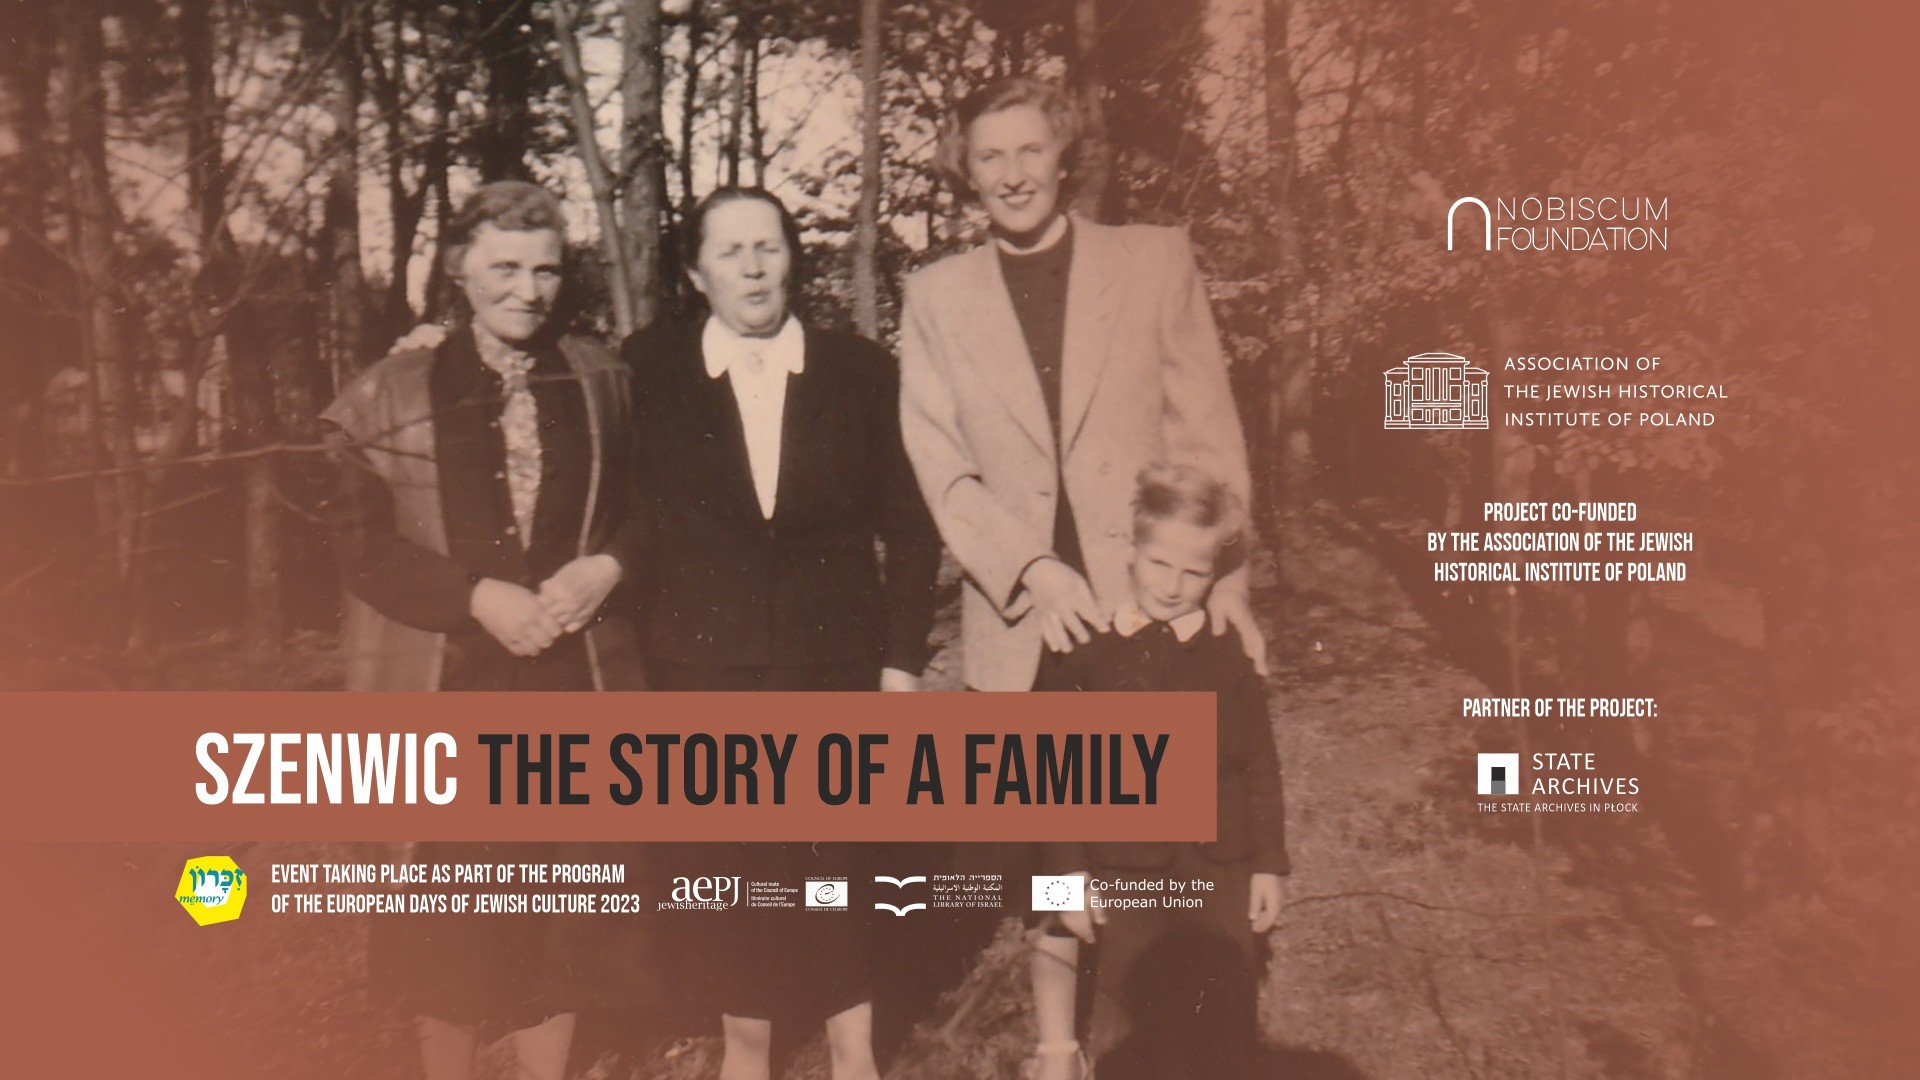 Exhibition “Szenwic. The story of a family” now available online!